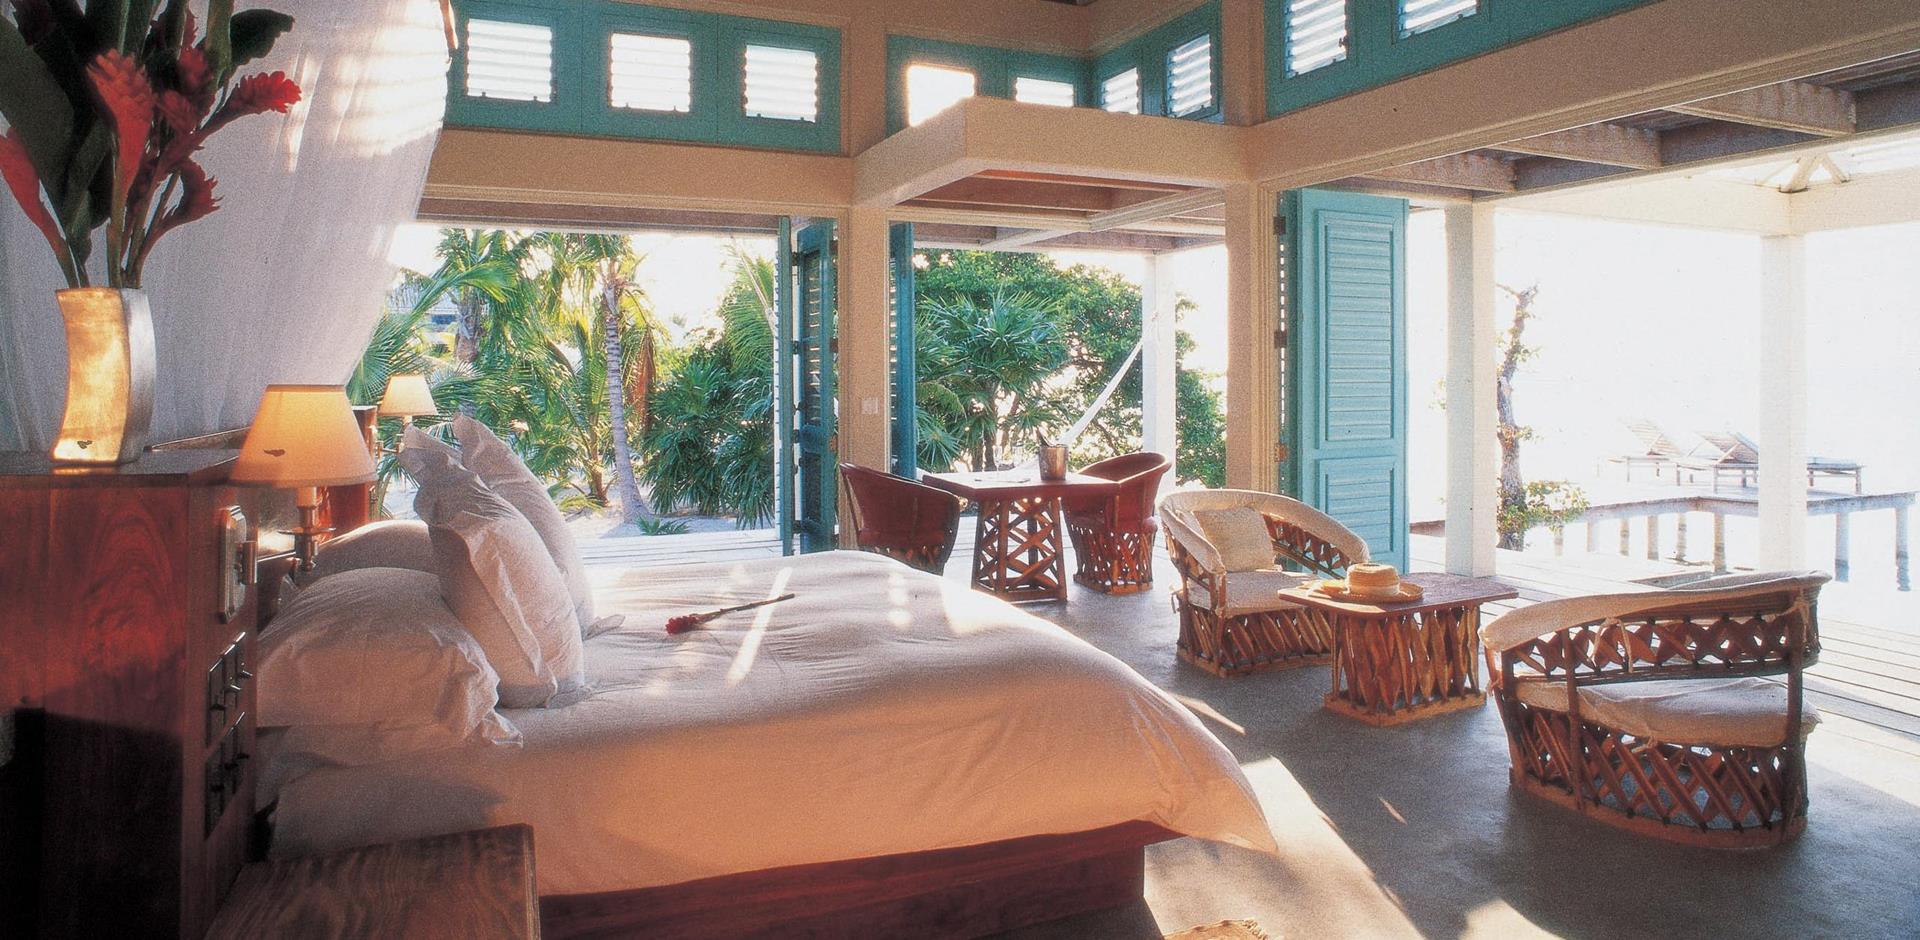 Bedroom, Cayo Espanto, The Cayes, Belize, Central America